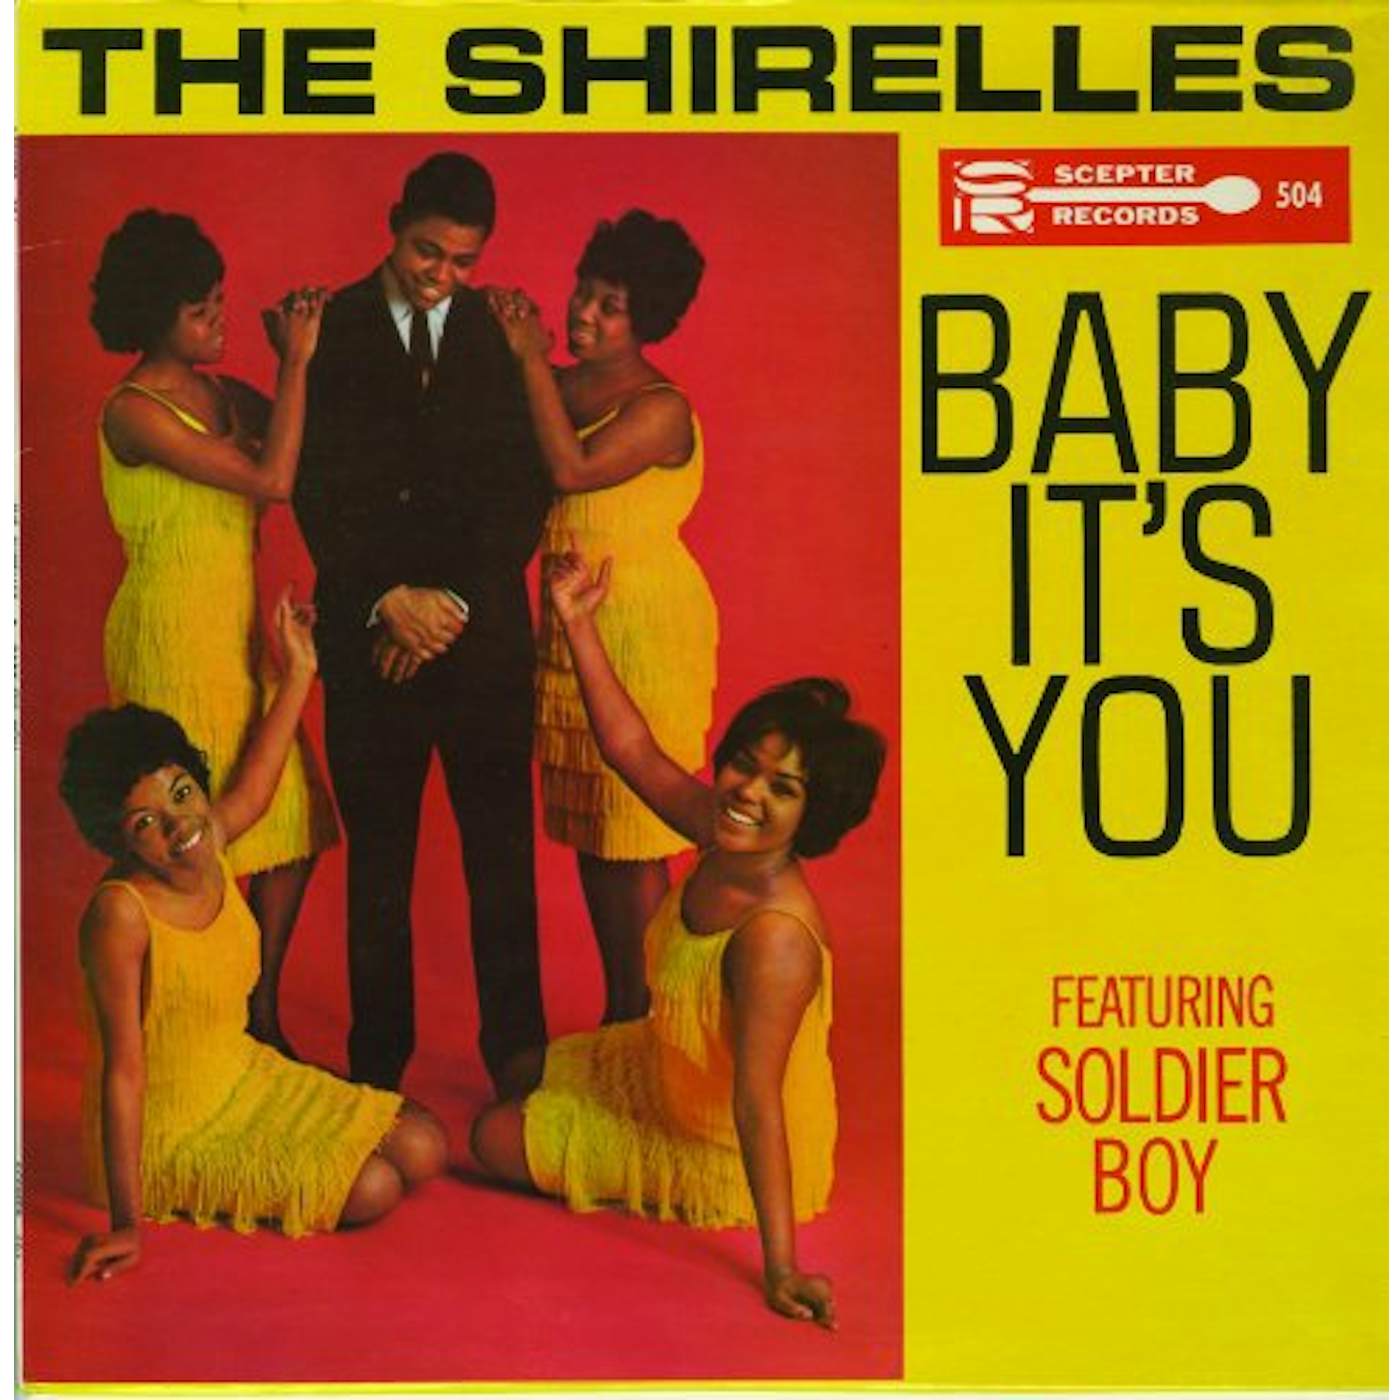 The Shirelles BABY ITS YOU Vinyl Record